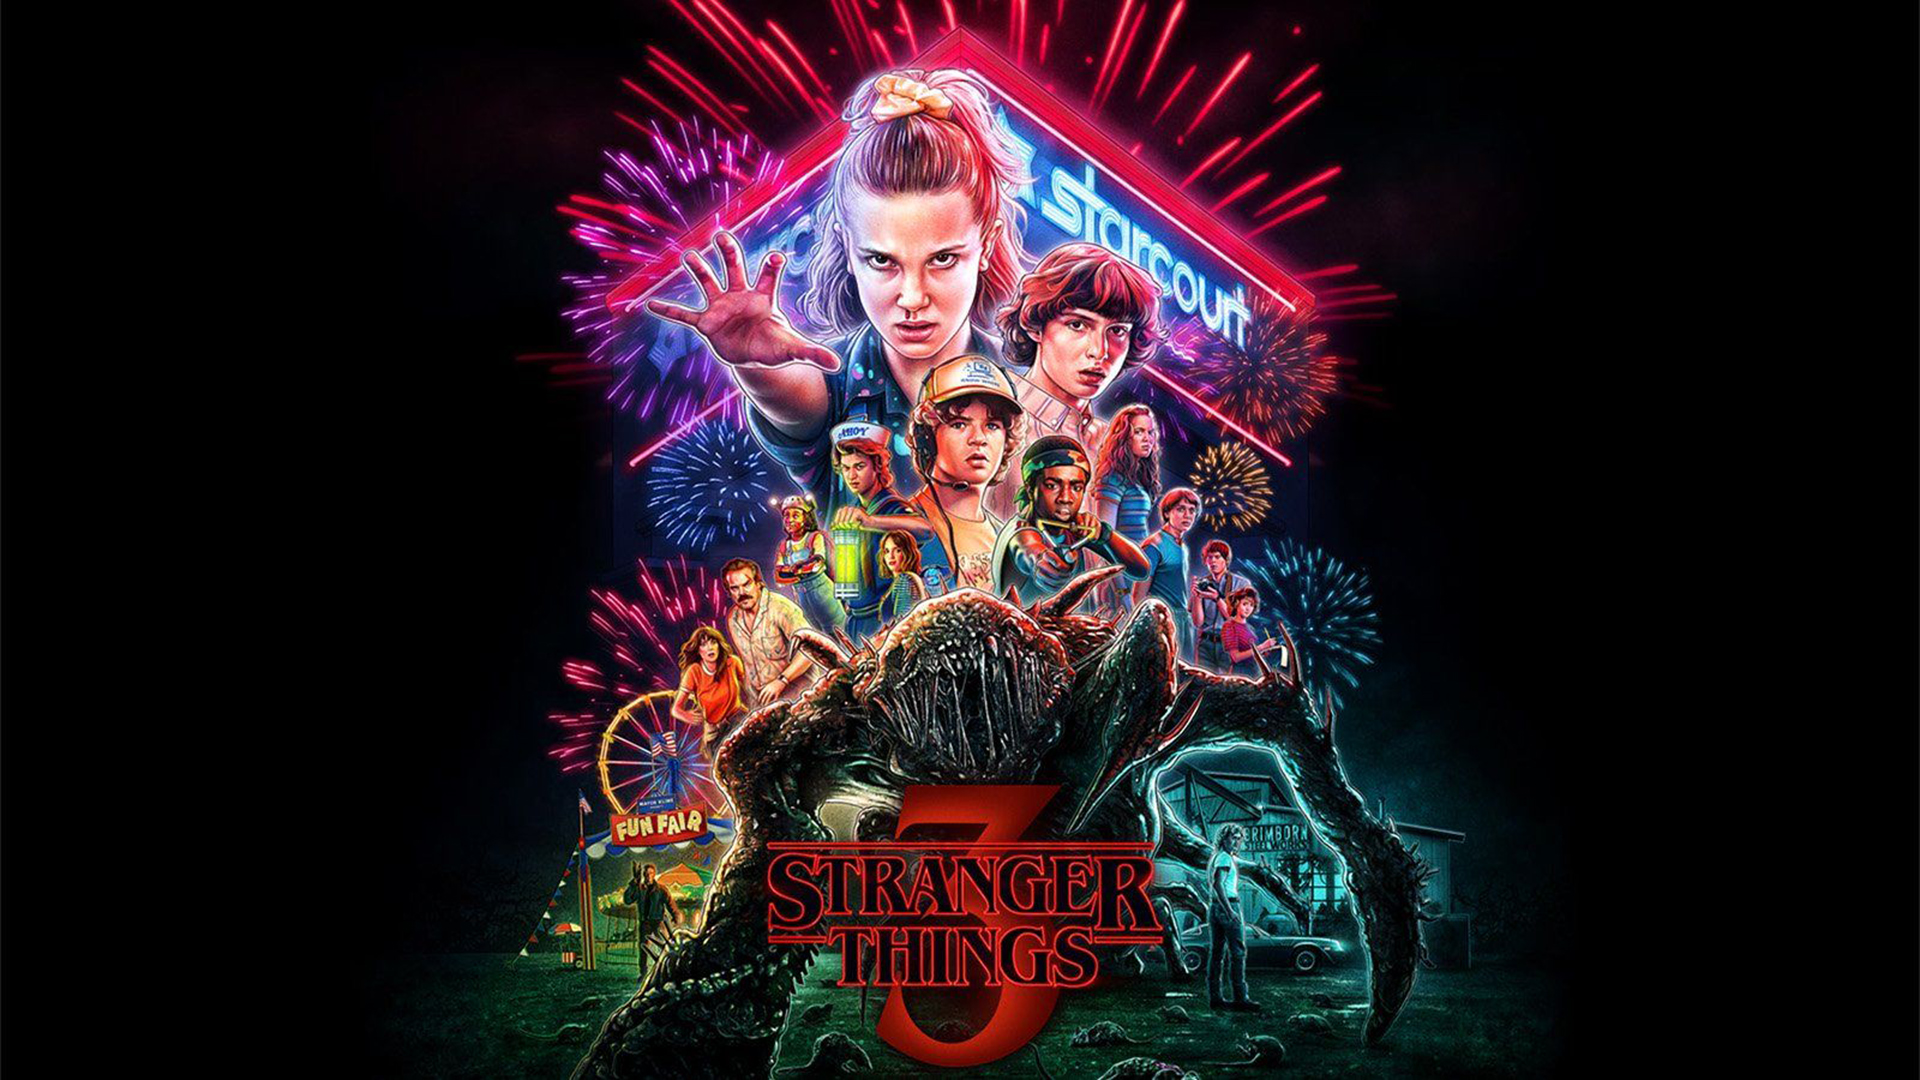 Cool Stranger Things Wallpapers for PC 